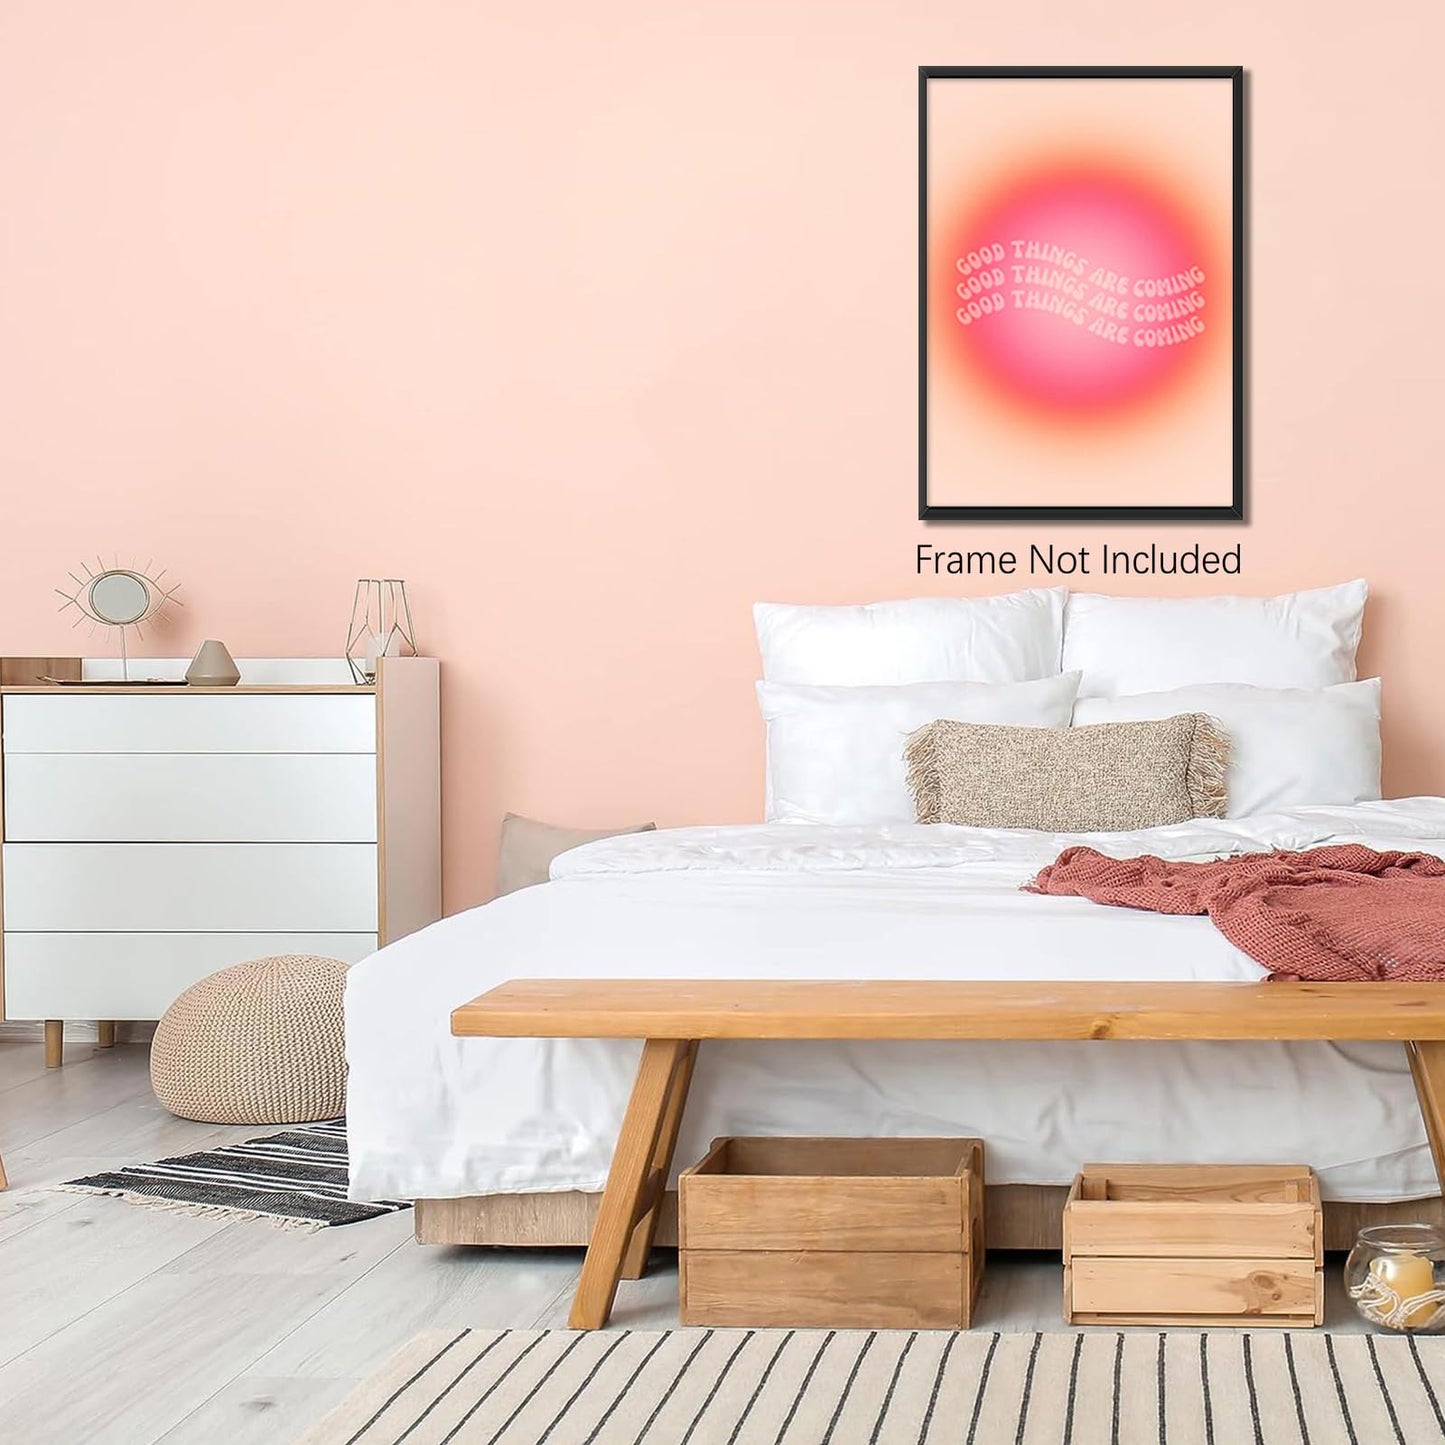 DFAIUY Colorful Gradient Aura Angel Good Things Are Coming Poster for Room Aesthetic Positive Quotes Canvas Wall Art Prints Abstract Trendy Y2k Style Room Wall Decor Bedroom Office 12x16in Unframed